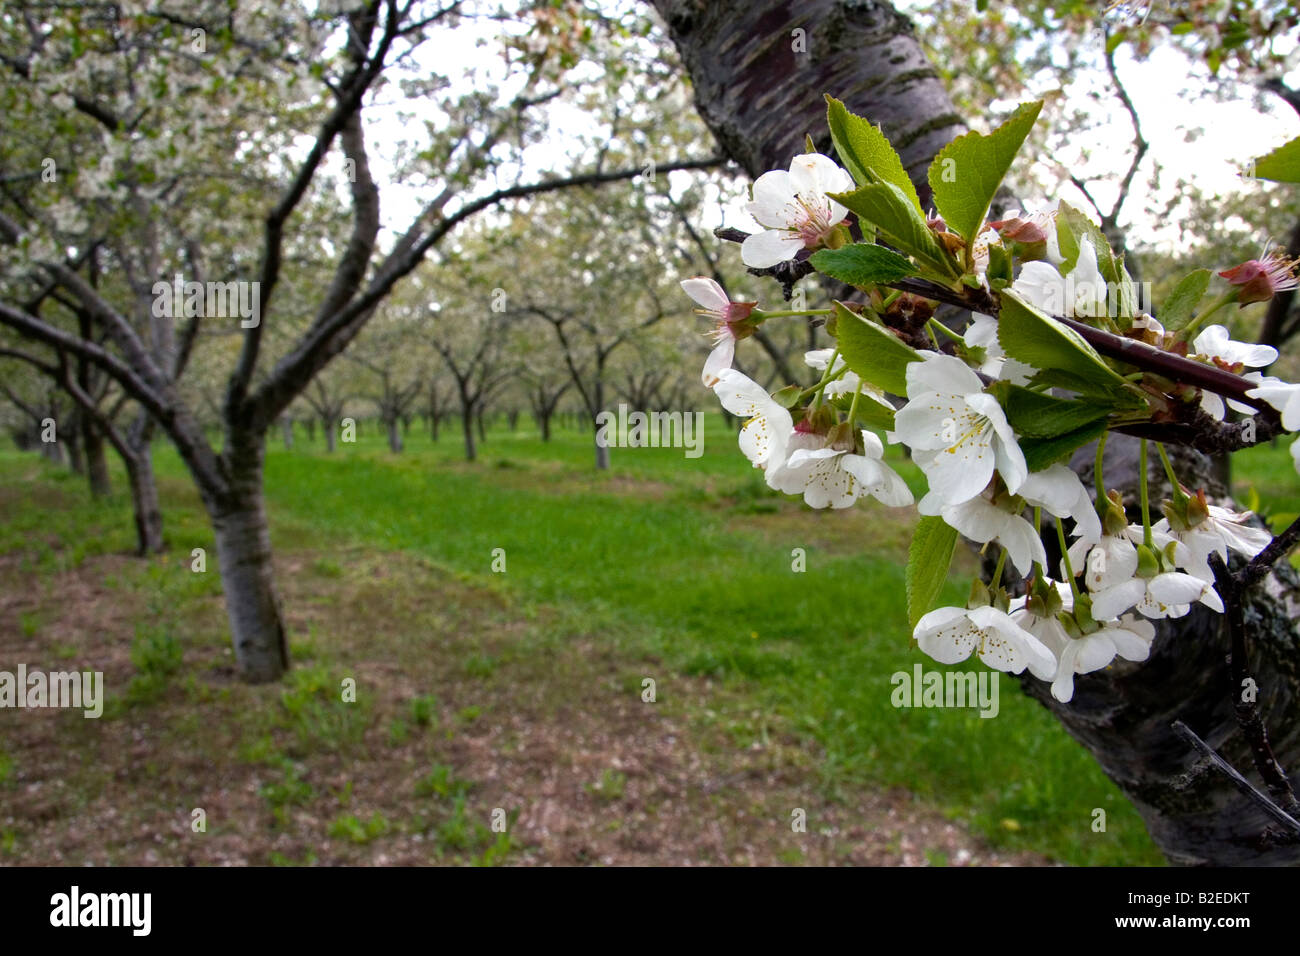 Apple blossom in an orchard at Leland Michigan Stock Photo